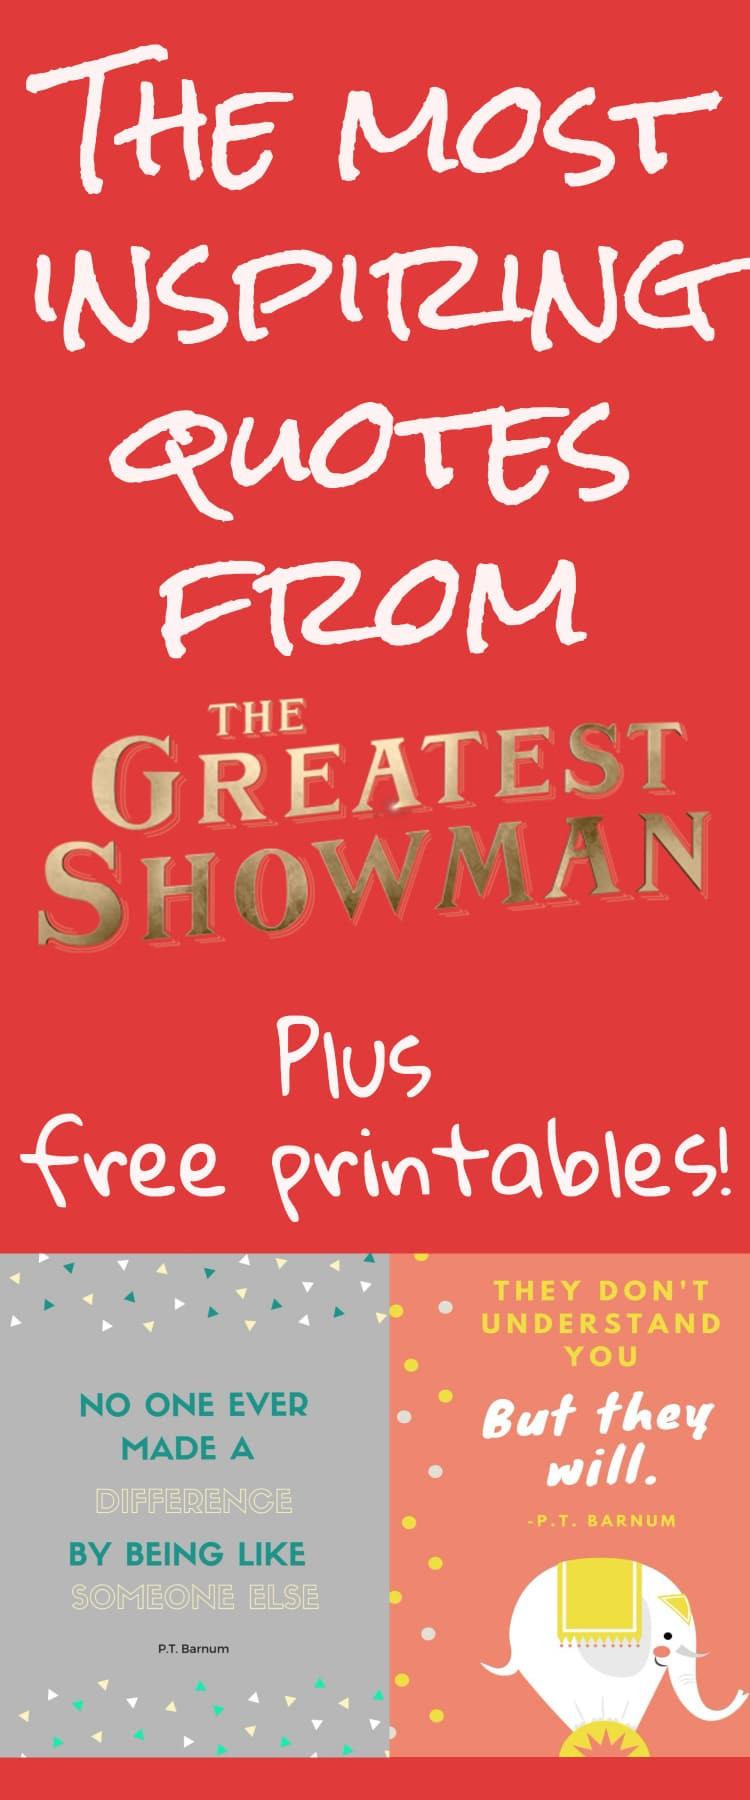 Greatest Inspirational Quotes
 The Best Inspiring Quotes from The Greatest Showman Free